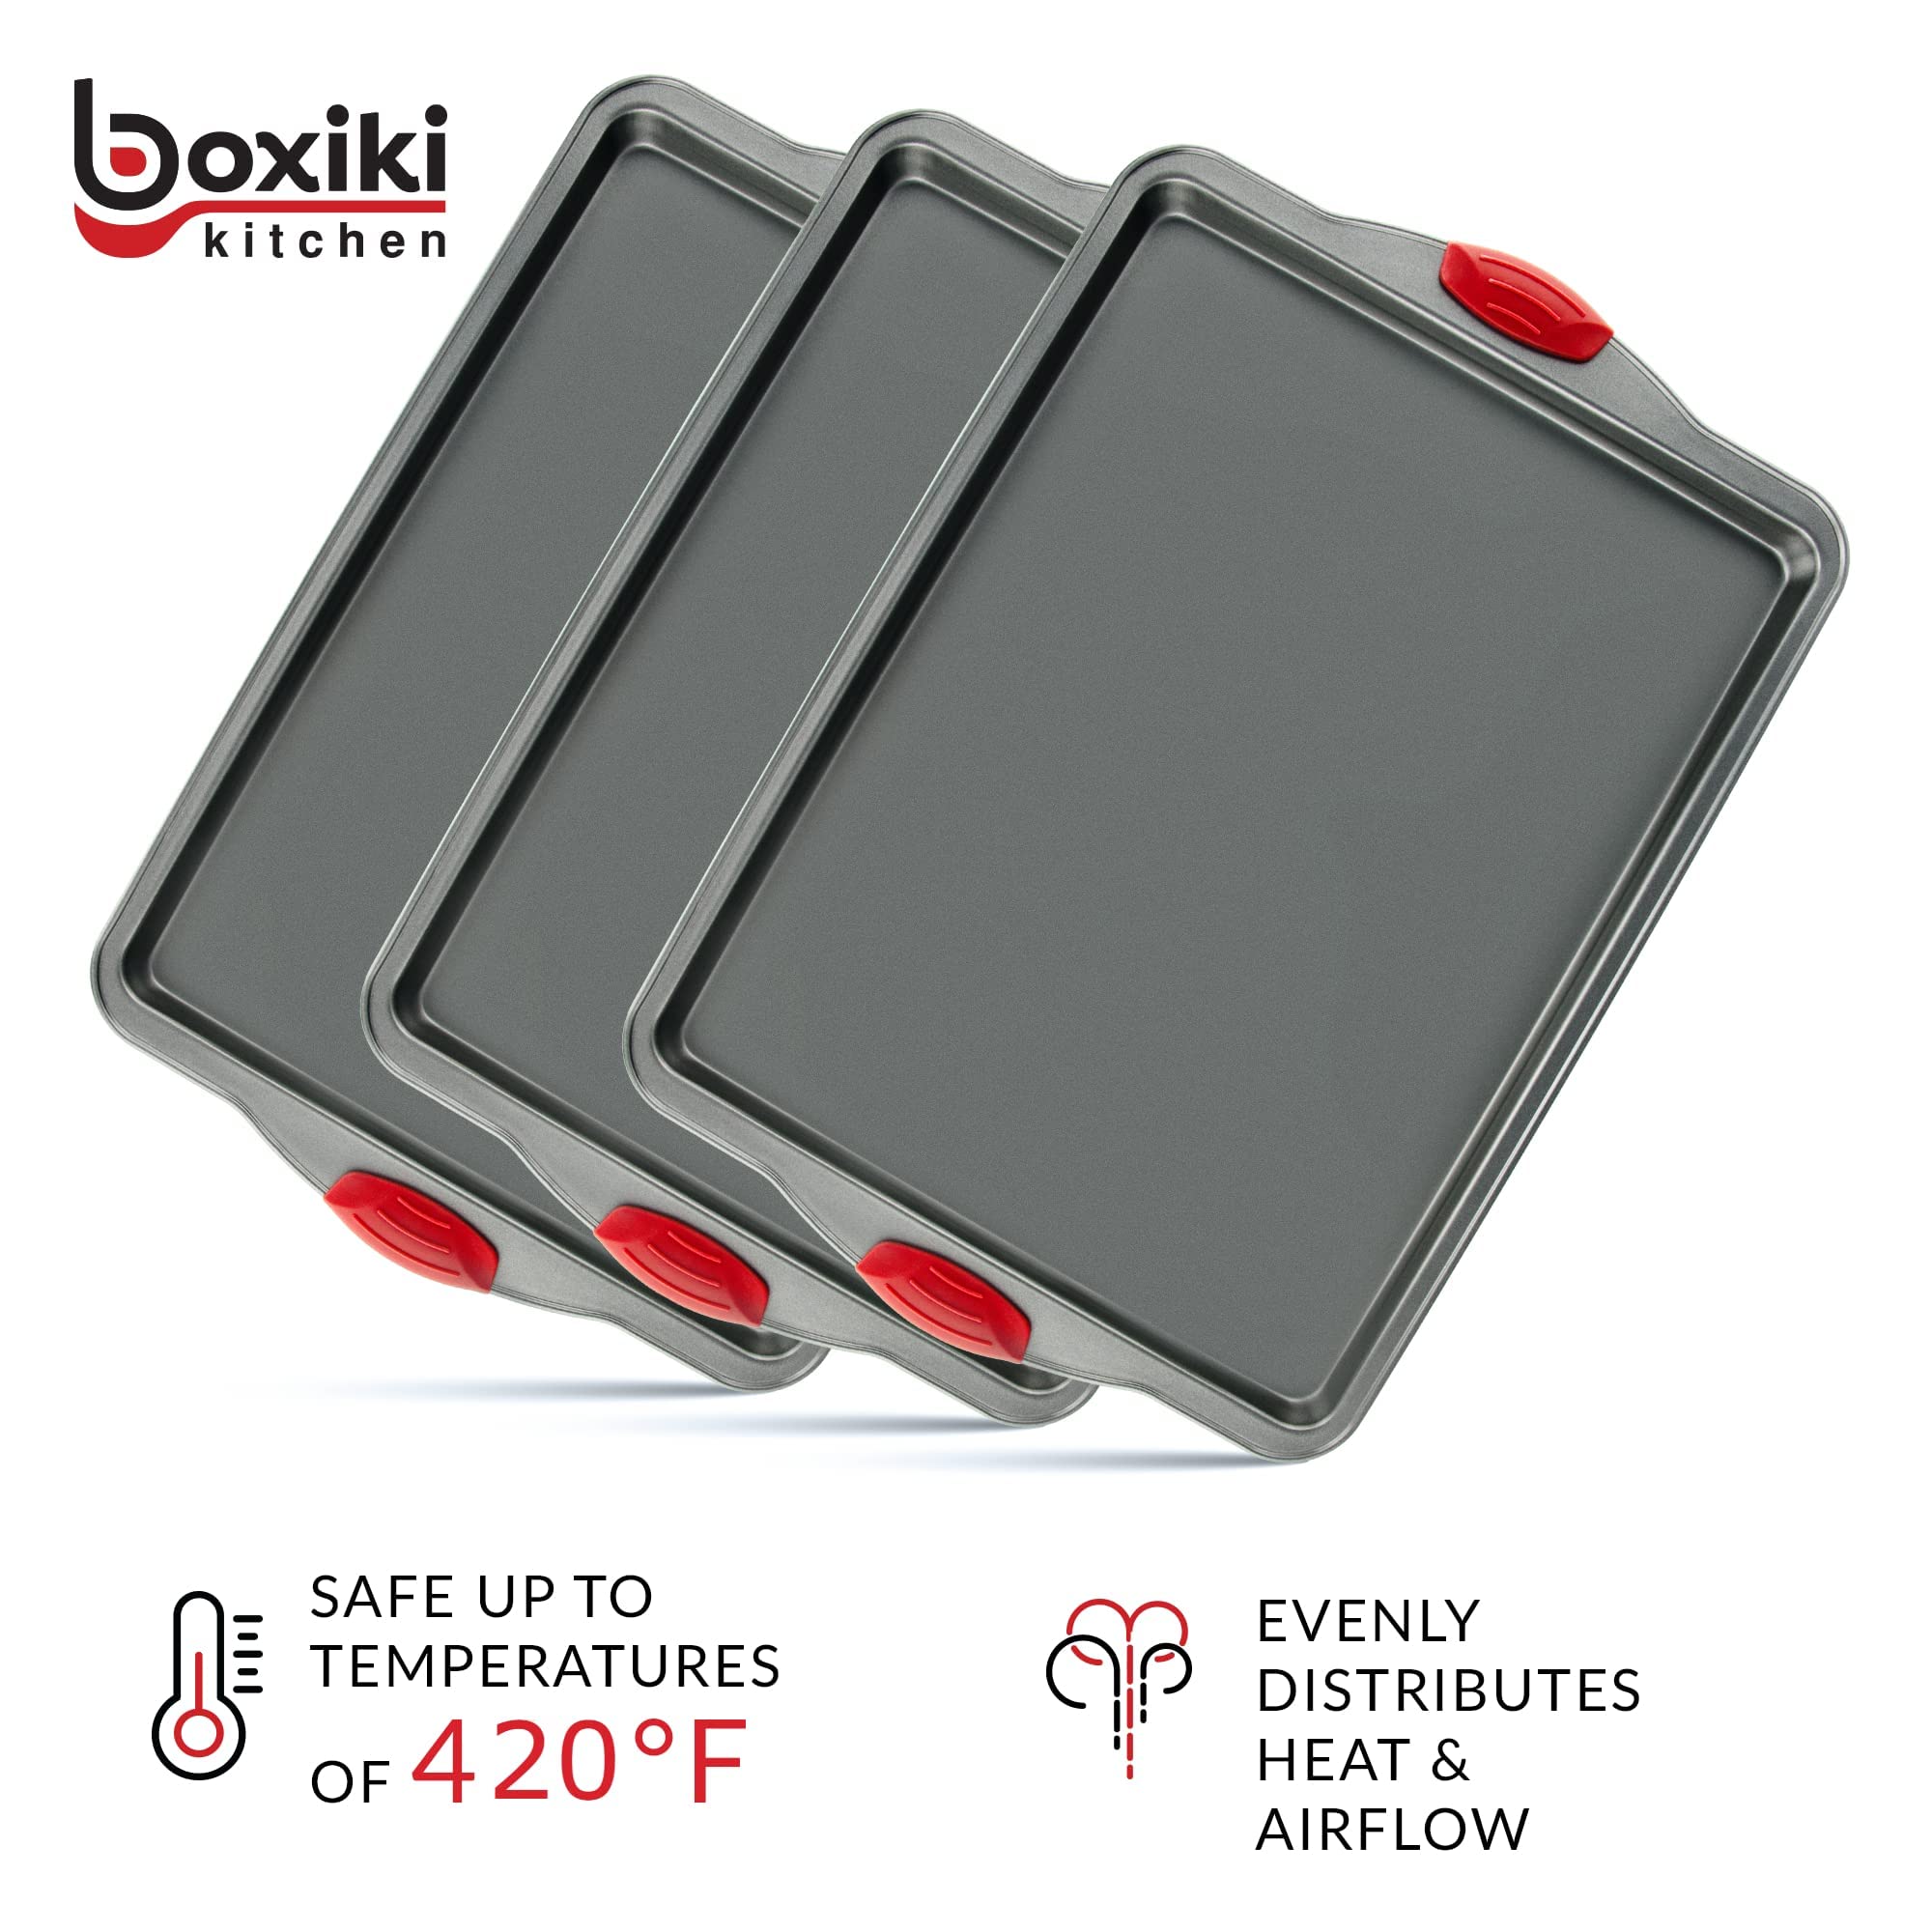 Nonstick Baking Sheet Tray Set of 3 - These Cookie Sheet Pans are Non-toxic, Dent, Warp, and Rust Resistant. Made with Heavy Gauge Carbon Steel for Oven Baking Sheets.